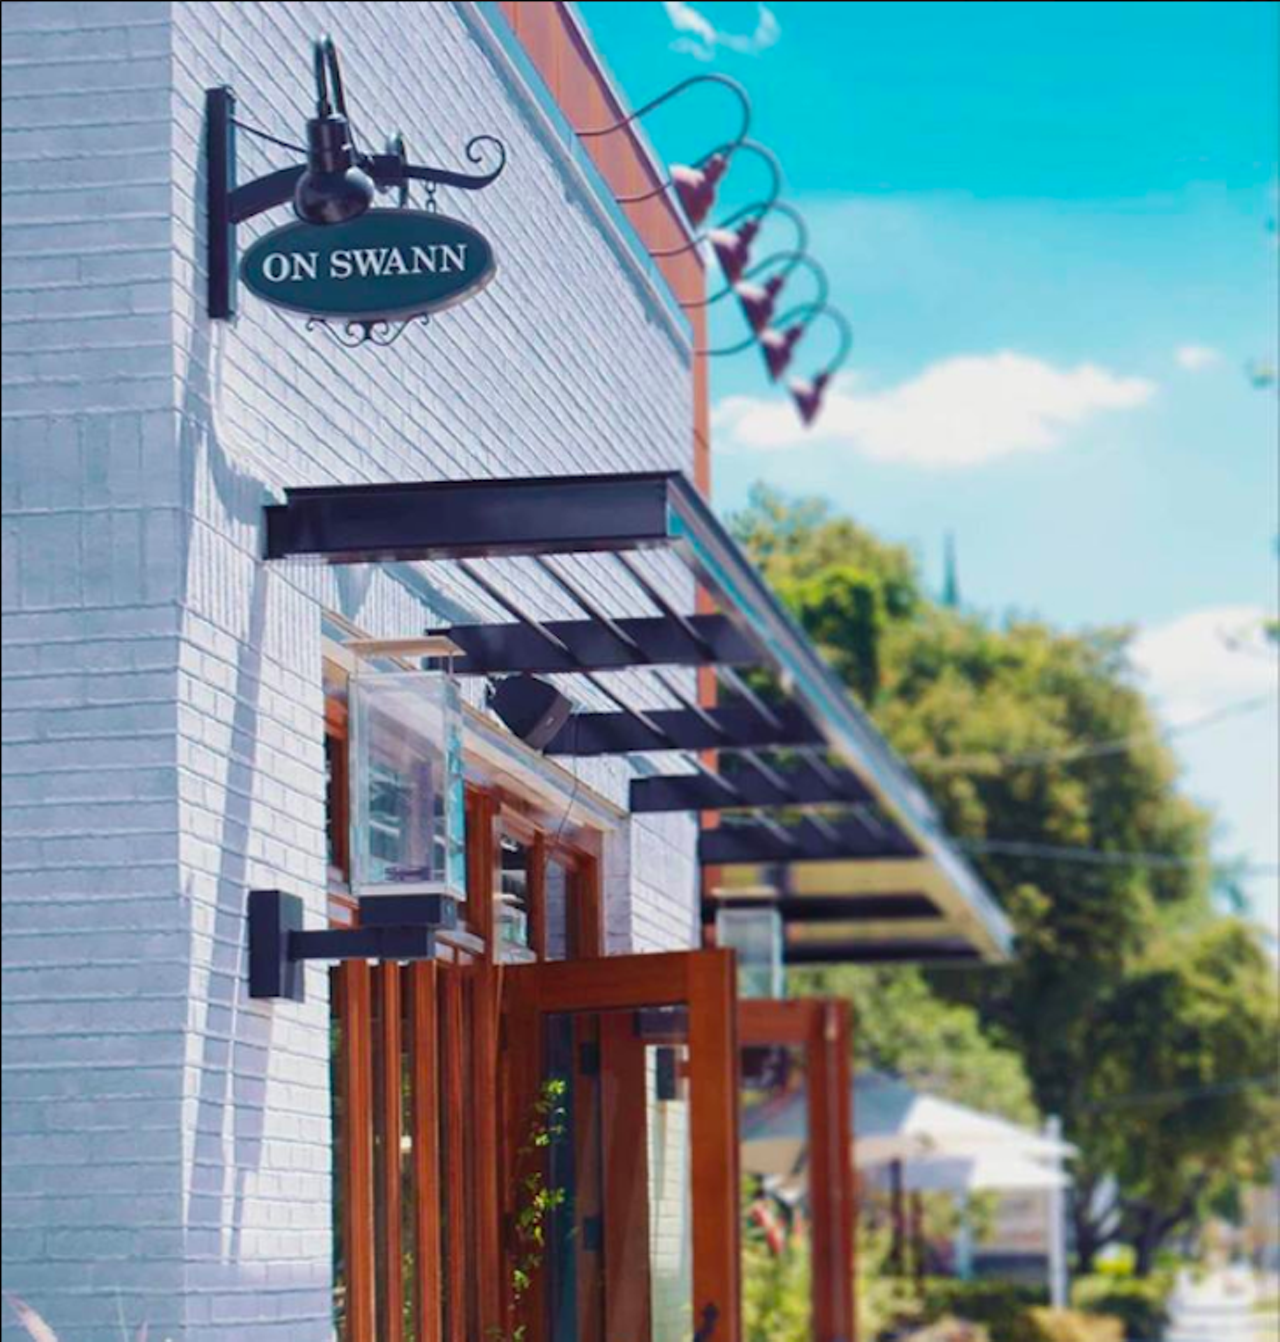 On Swann  
1501 W. Swann Ave., Tampa, 813-251-0110 
Head over to Hyde Park Village to ring in brunch with style. Beware, this place fills up quickly, so get there early and indulge in craft cocktails and elevated brunch offerings.
Photo via On Swann/ Instagram